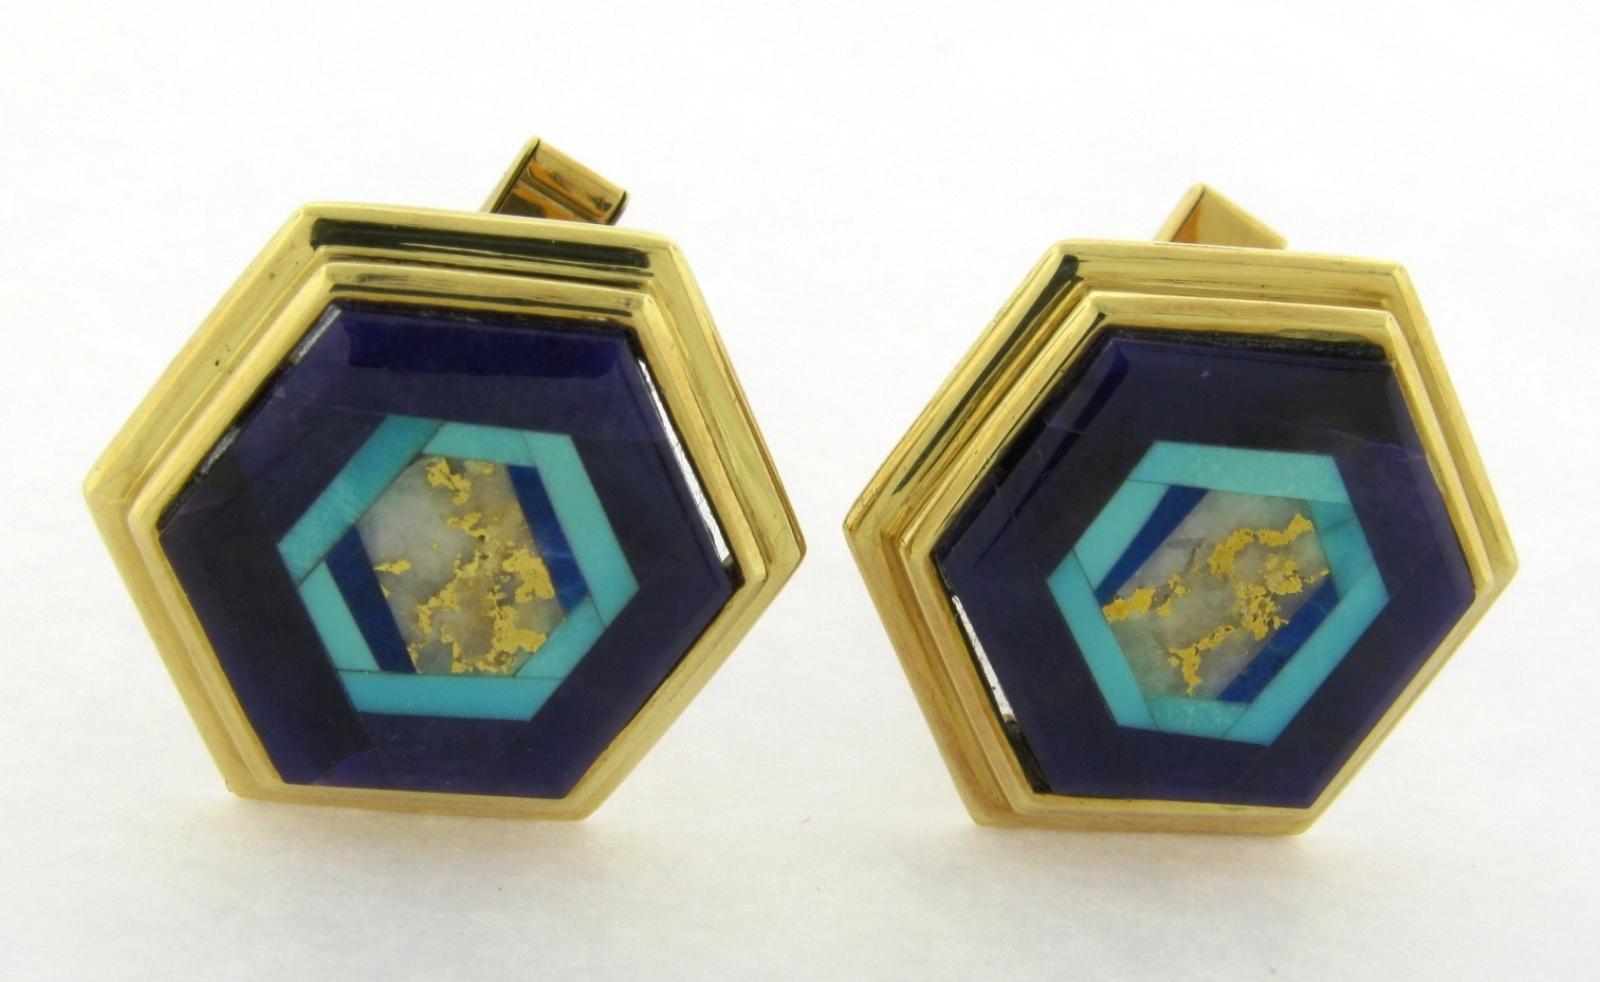 This is a beautiful and rare pair of Gemstone cufflinks by famous intarsia designer Nicolai Medvedev. The gemstones consist of sugilite, turquoise, lapis lazuli and gold quartz. They are signed N. Medvedev on the stone the gold is marked 18k